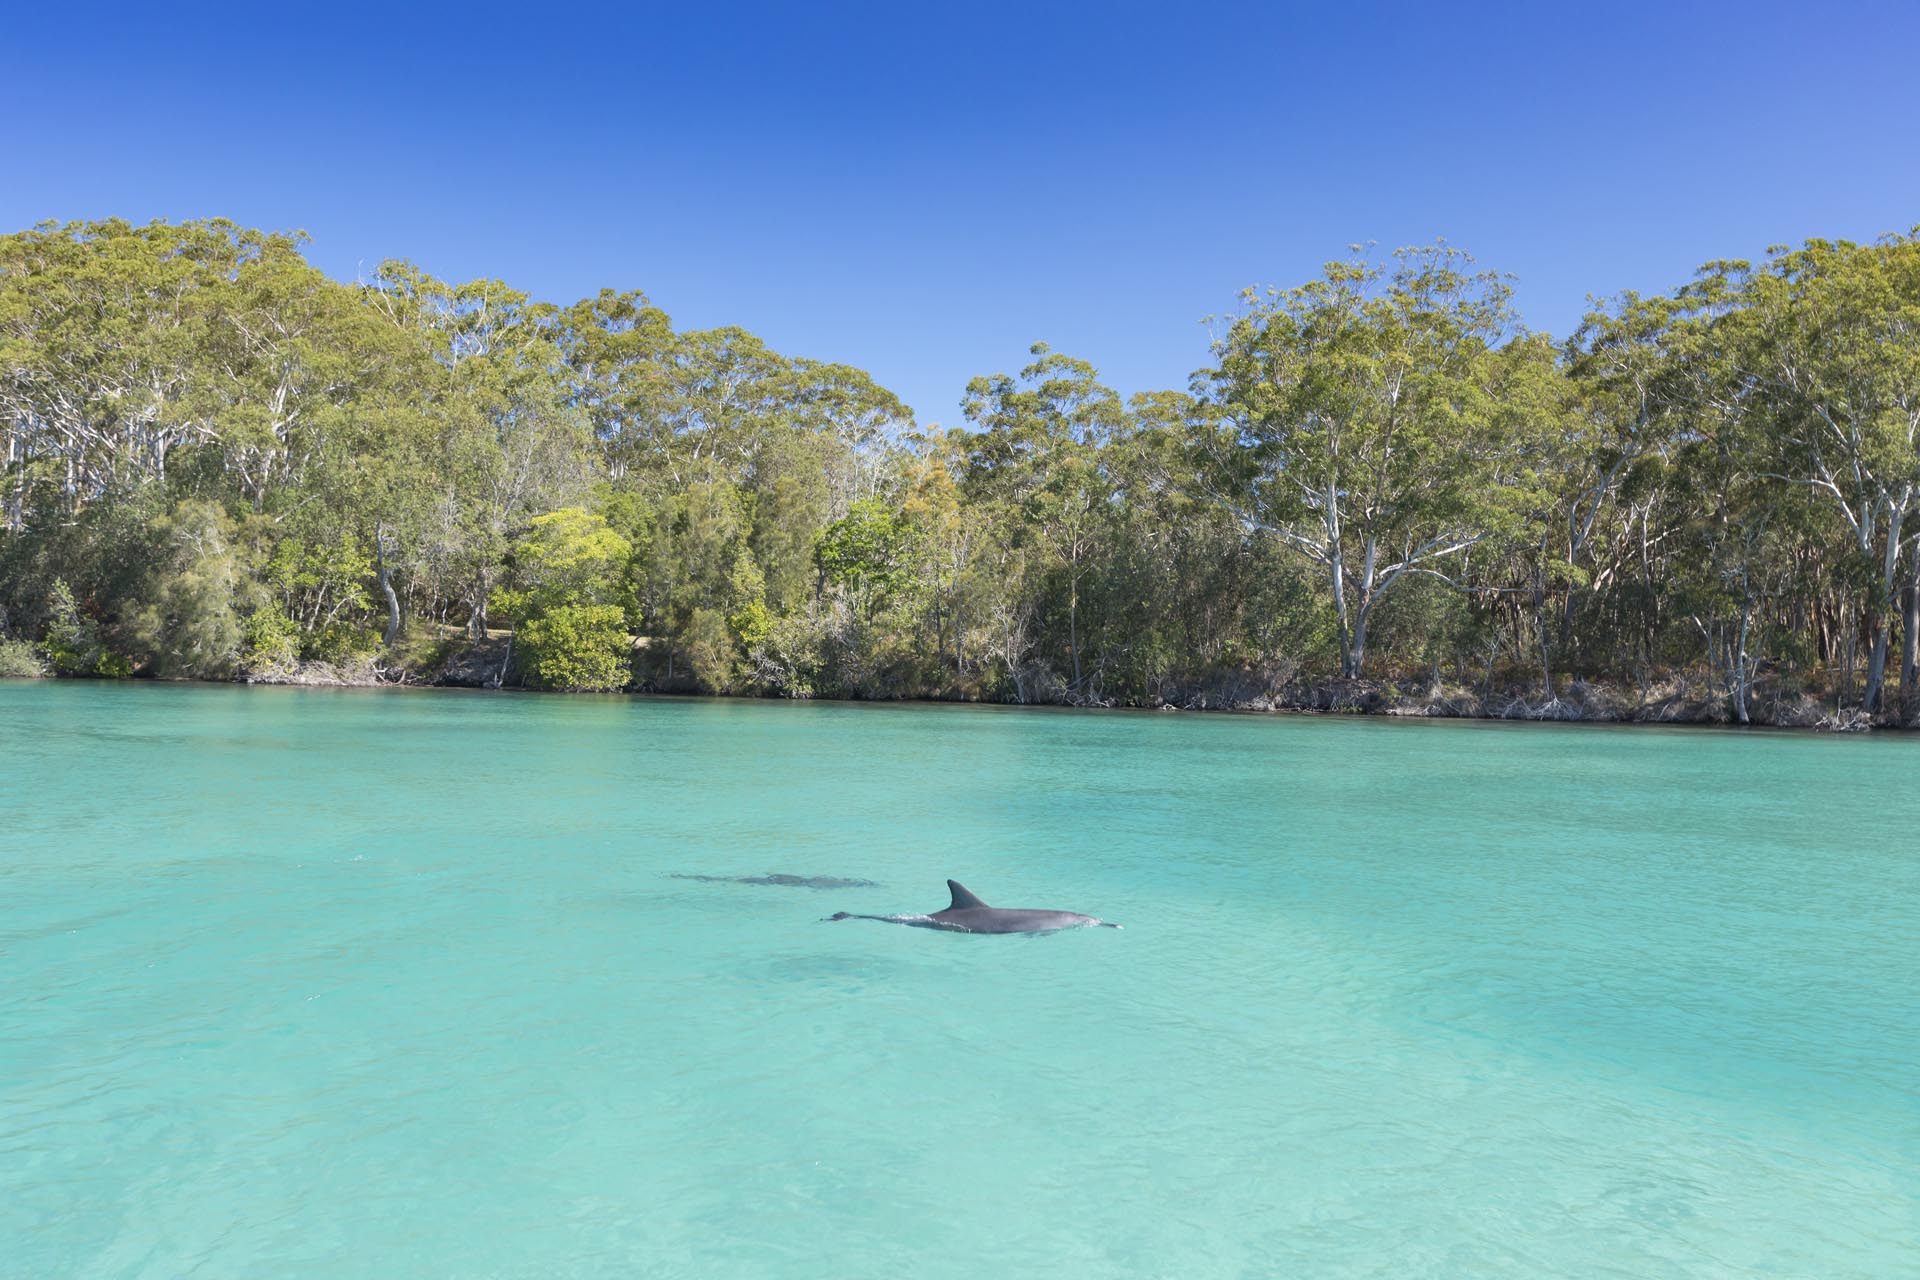 26. Dolphins frolicking near Hotel Forster